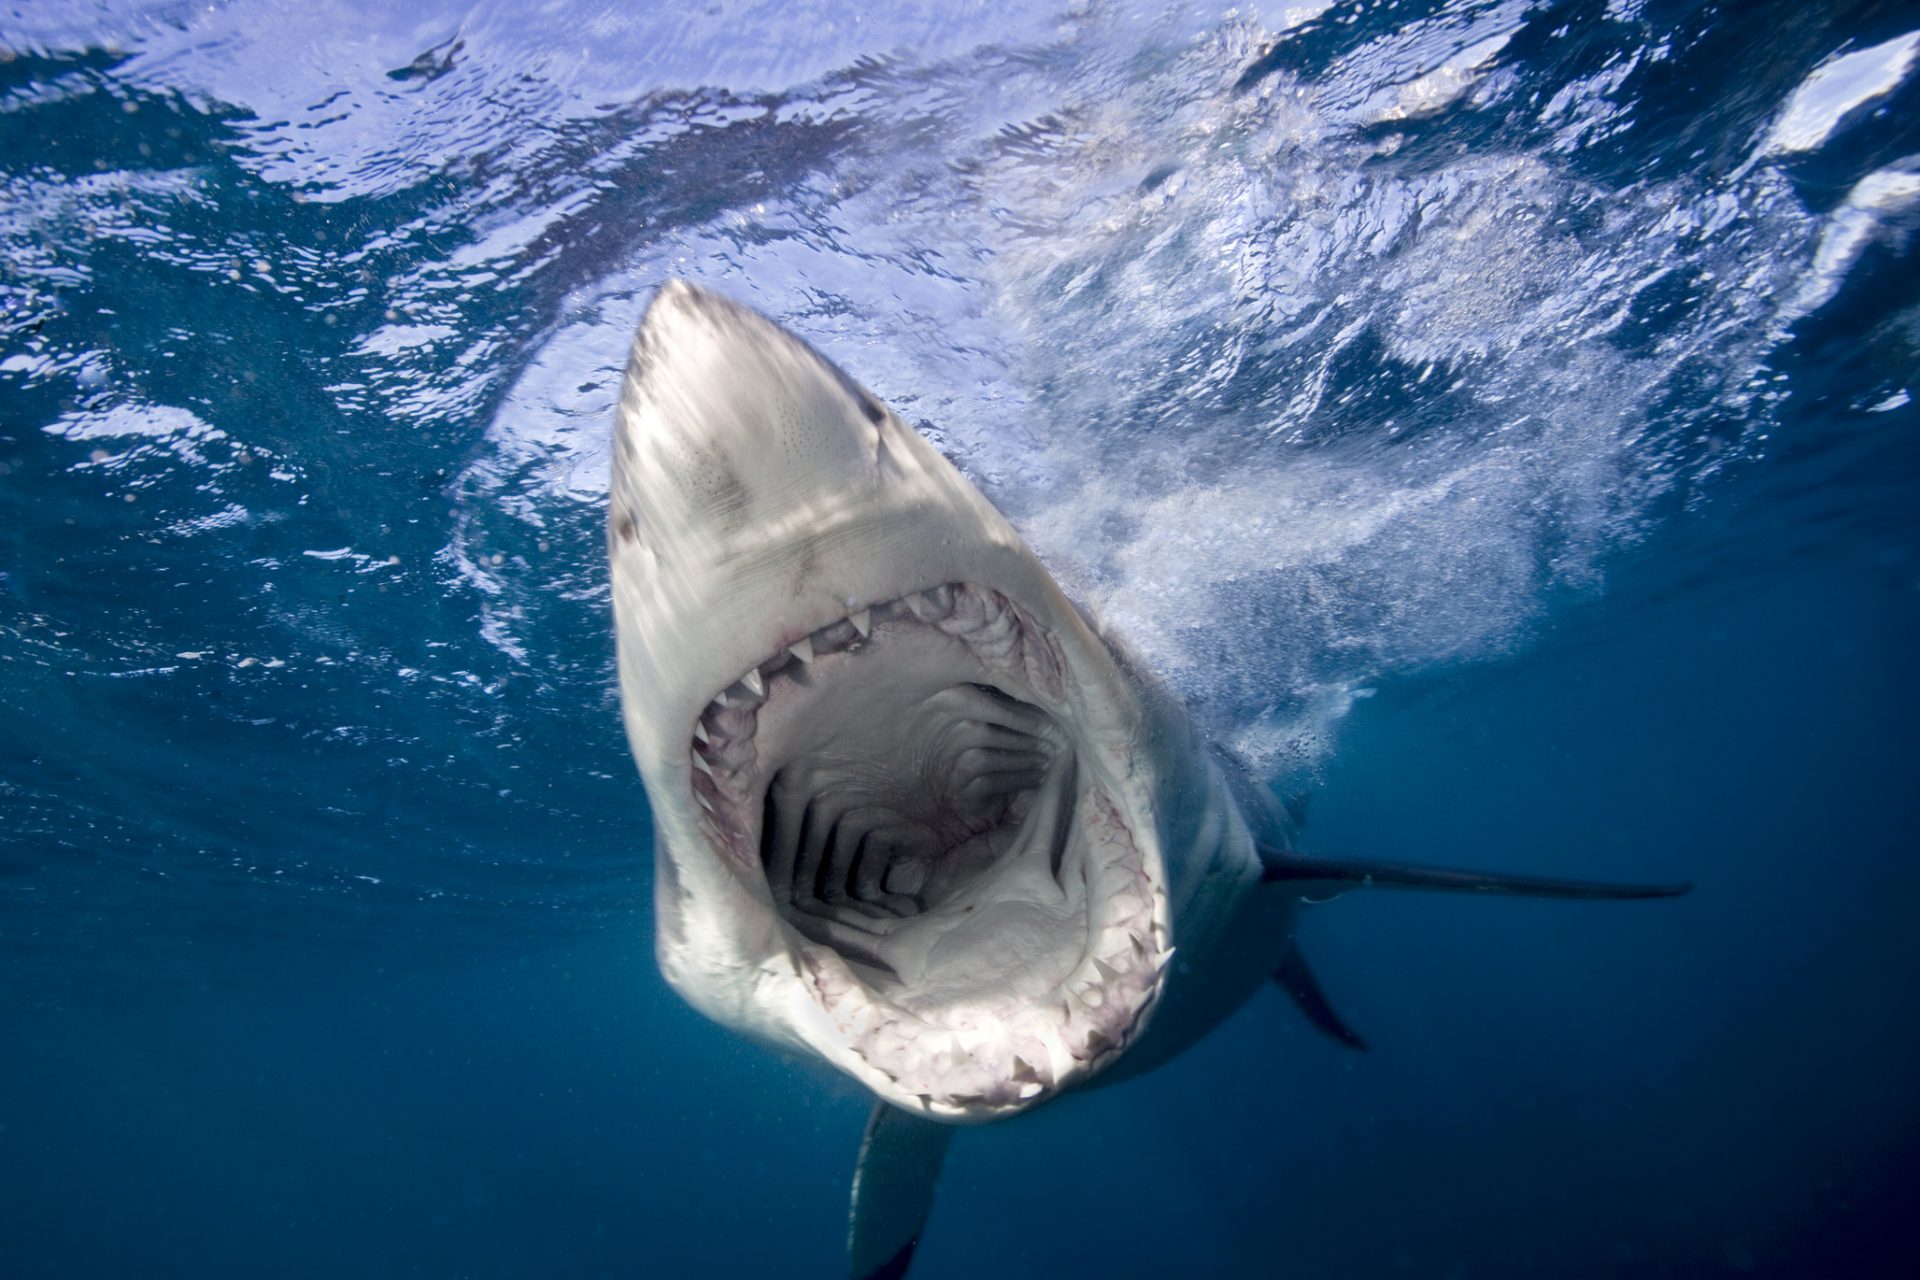 Two shark attacks in Florida on the same day: Should we be alarmed?